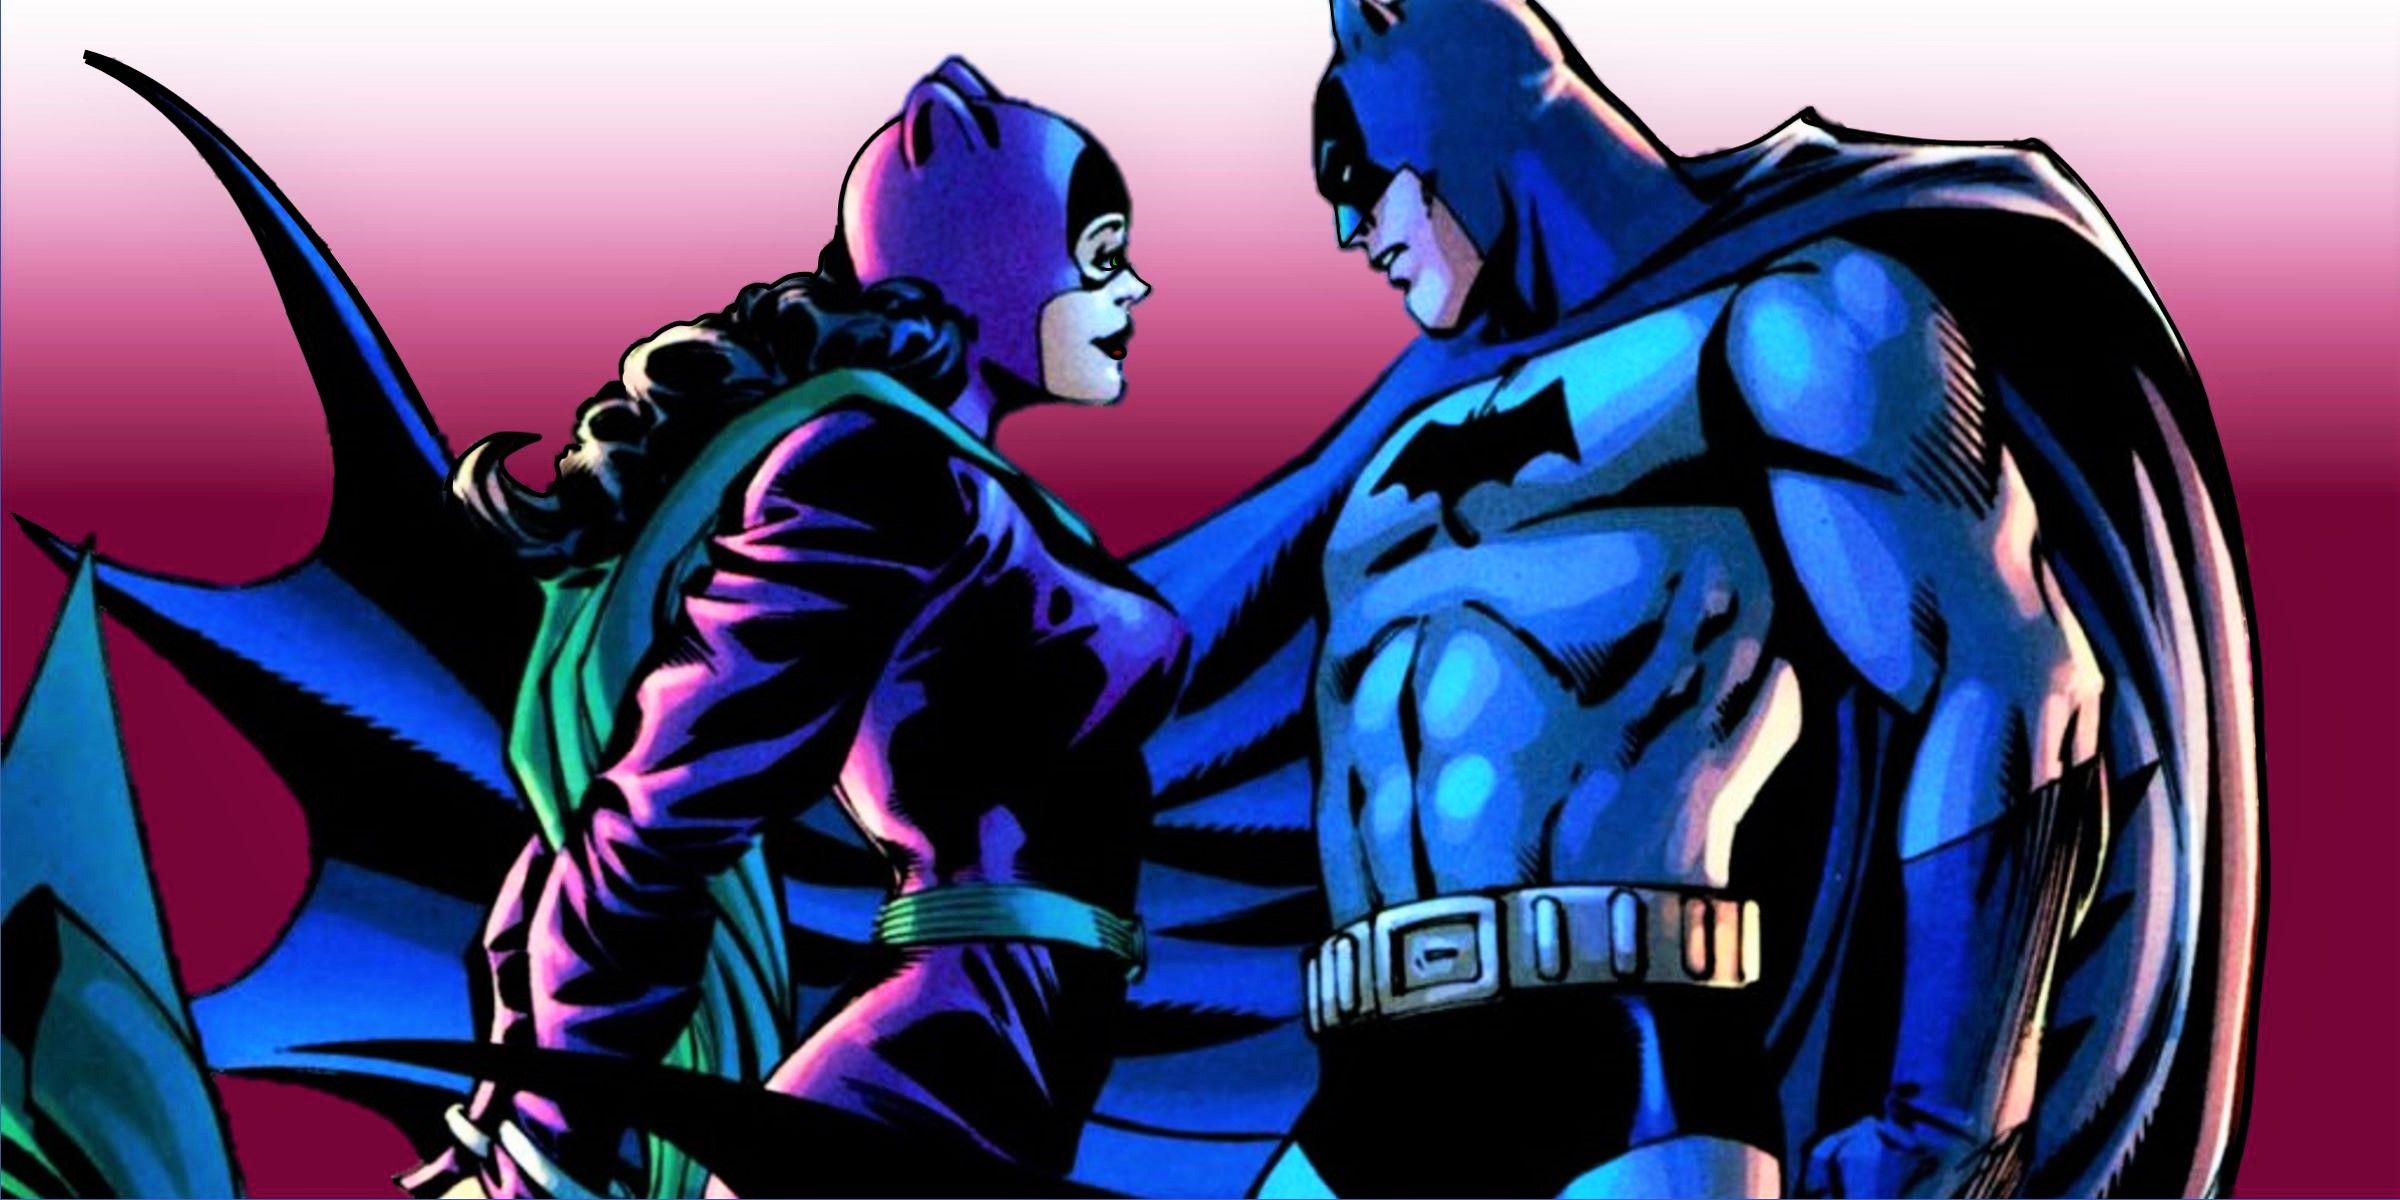 10 Things You Didn't Know About Batman & Catwoman's Romantic History